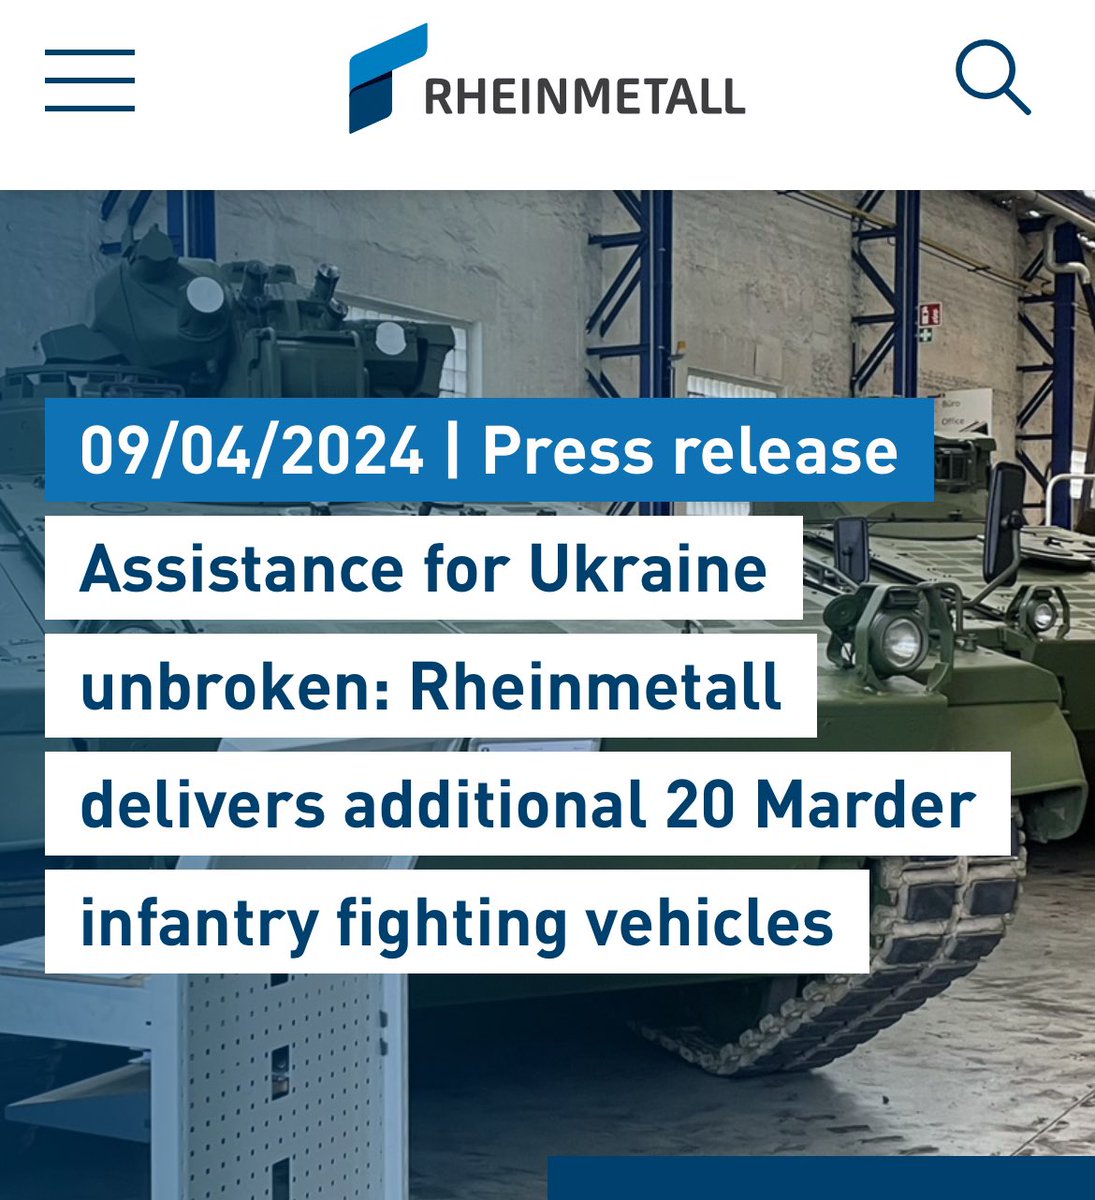 Rheinmetall (@RheinmetallAG) is going to transfer an additional 20 Marder 1A3 to Ukraine. “The German government comissioned Rheinmetall to deliver 20 additional Marder infantry fighting vehicles (IFVs) to the Ukraine. The order was placed in March 2024 and has a value in the…